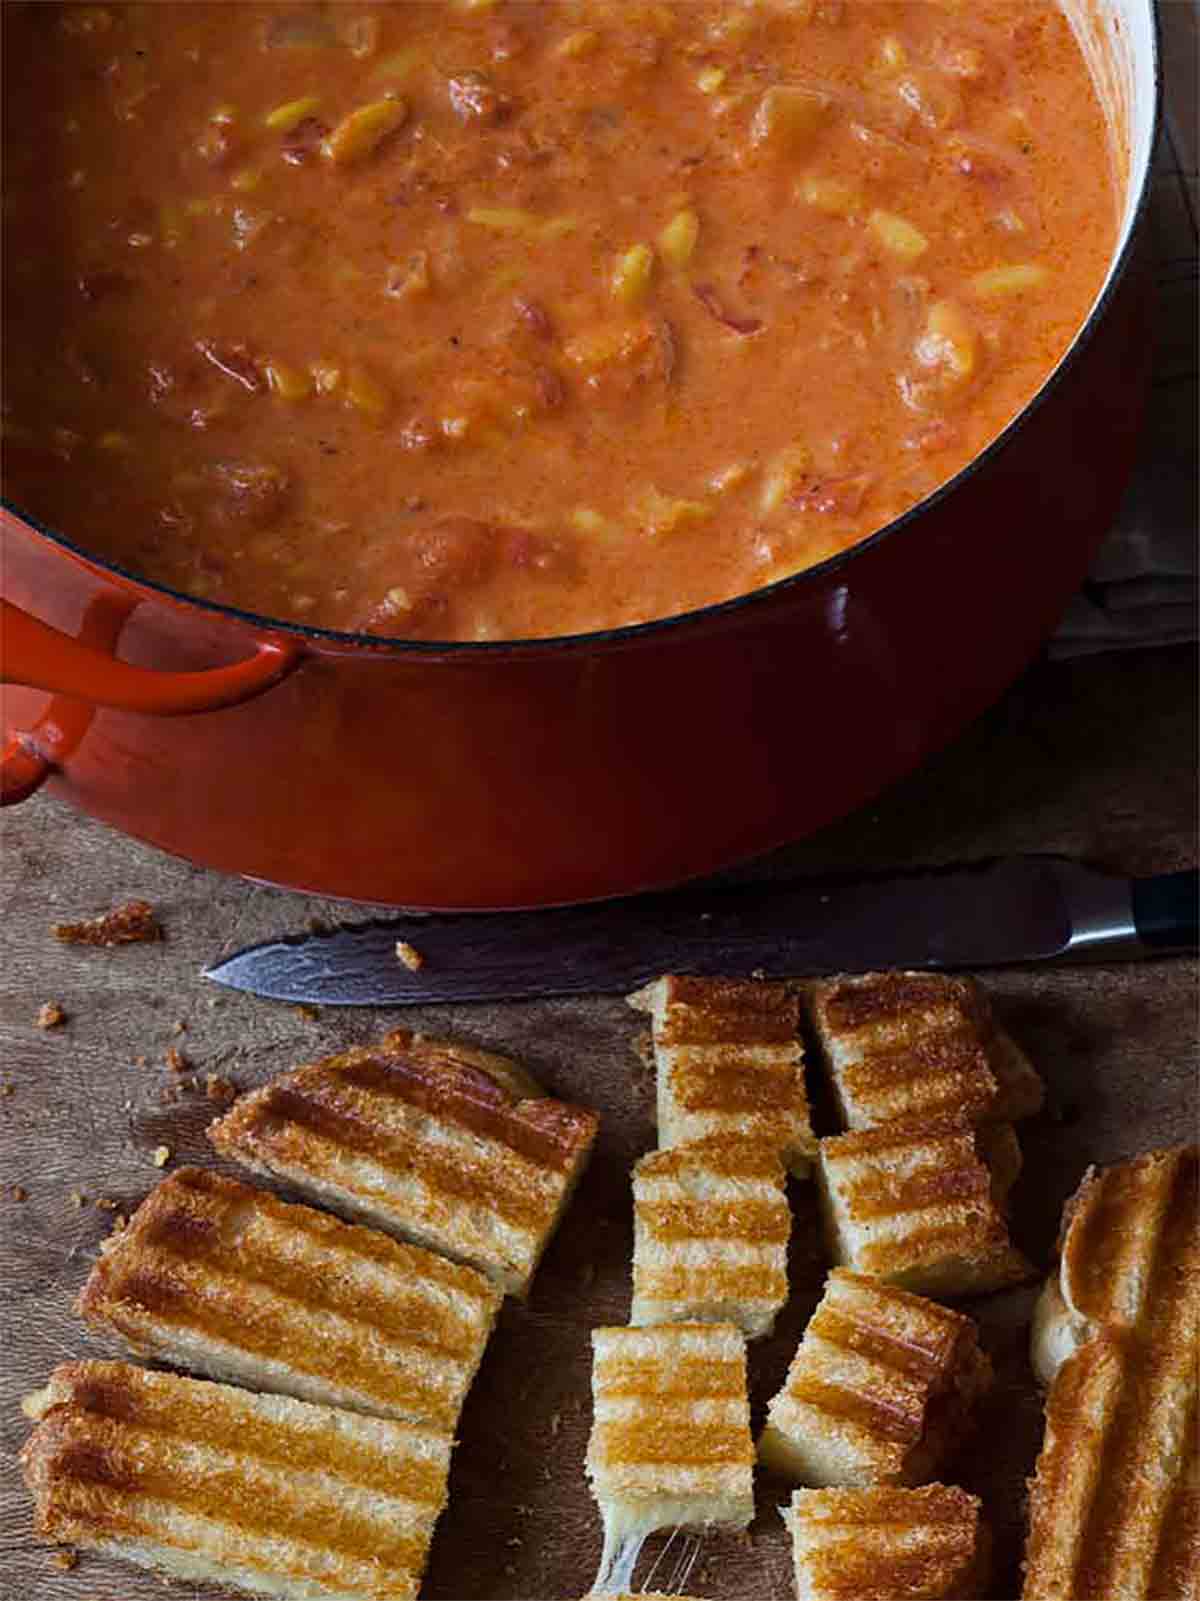 A large pot of Ina Garten's easy tomato soup, alongside a grilled cheese sandwich cut into croutons.